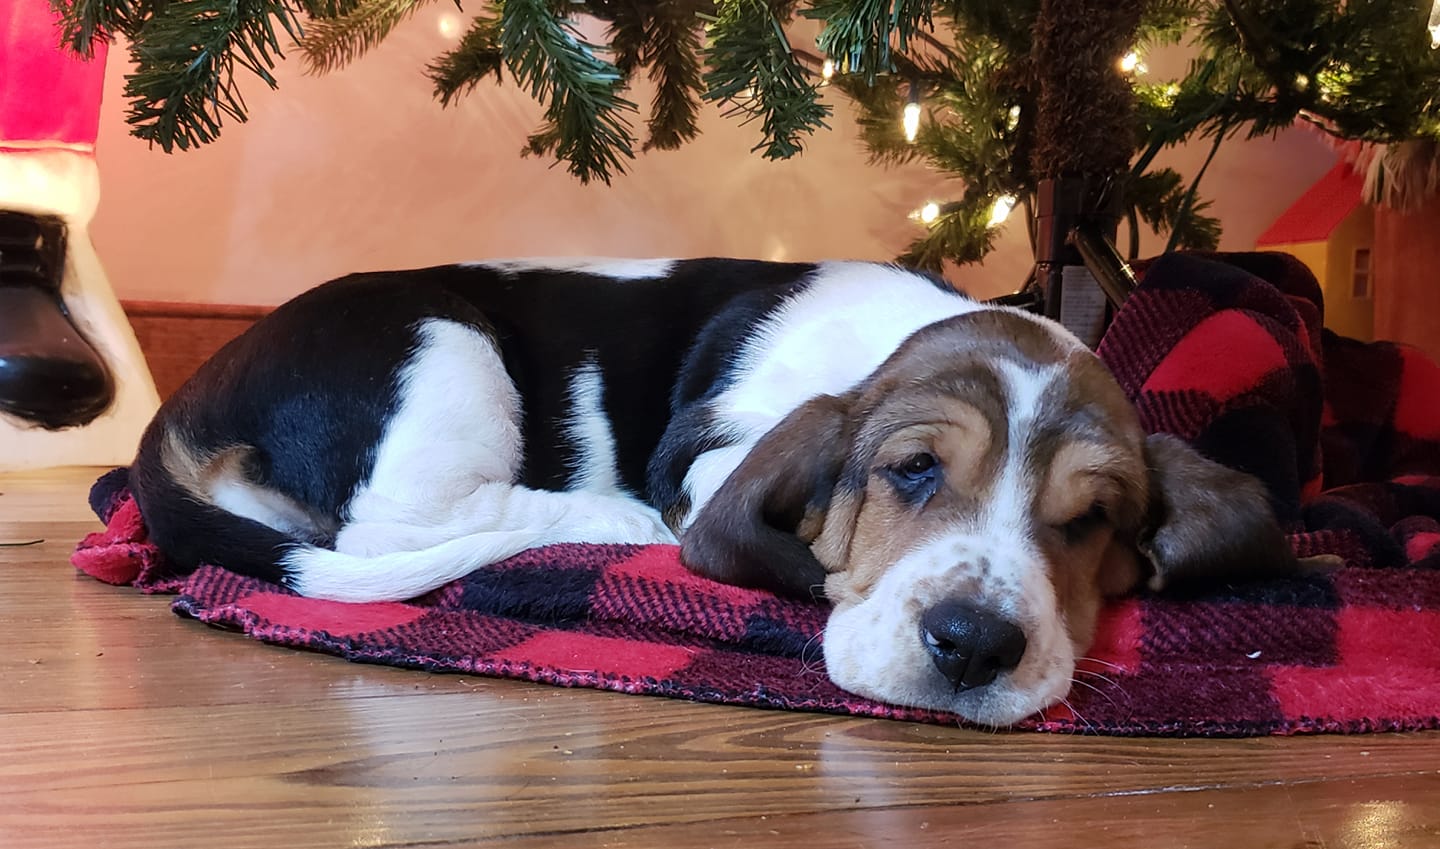 A Basset Hound lying on the blanket under the christmas tree